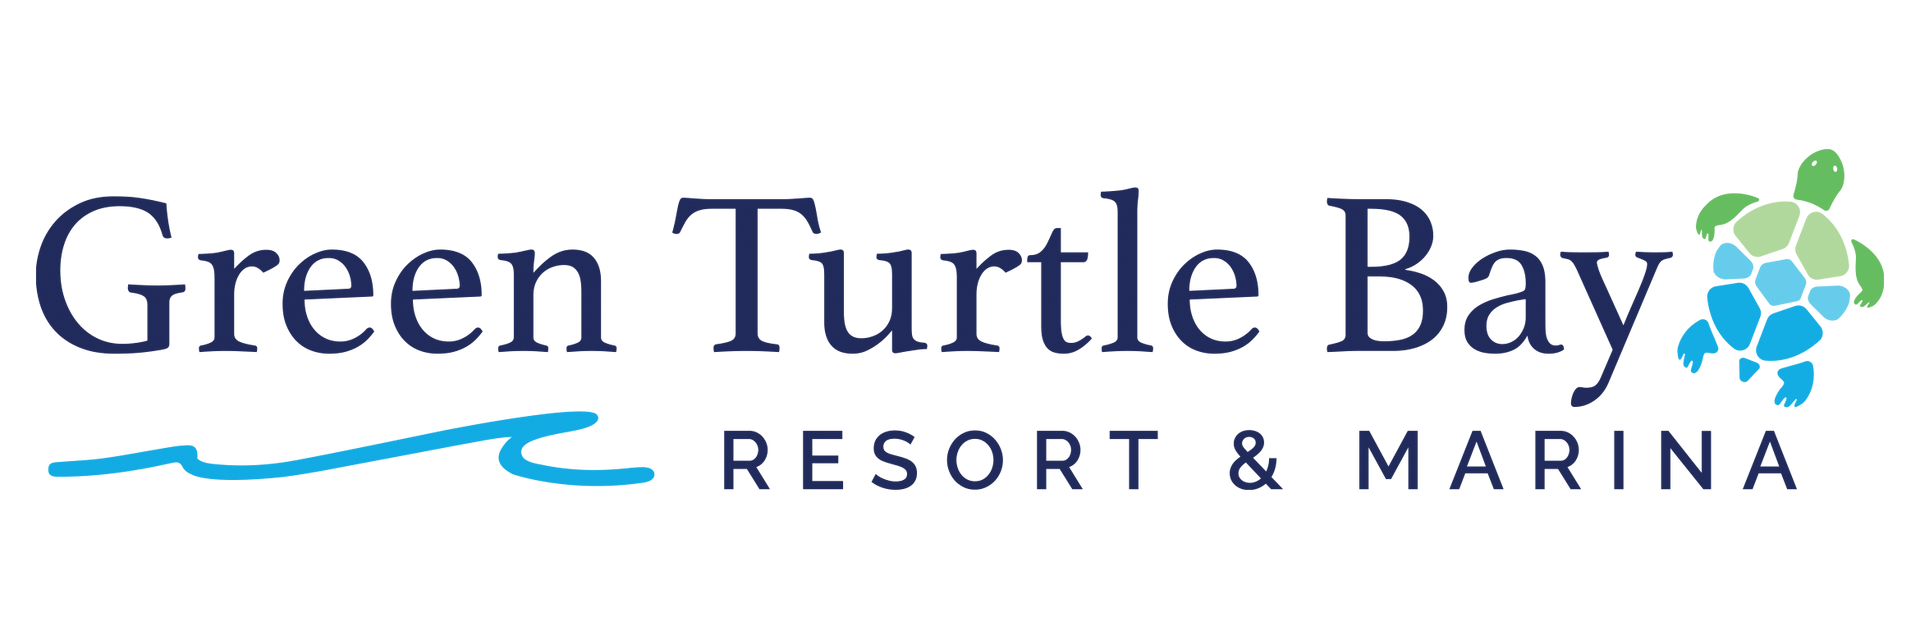 the logo for green turtle bay resort and marina